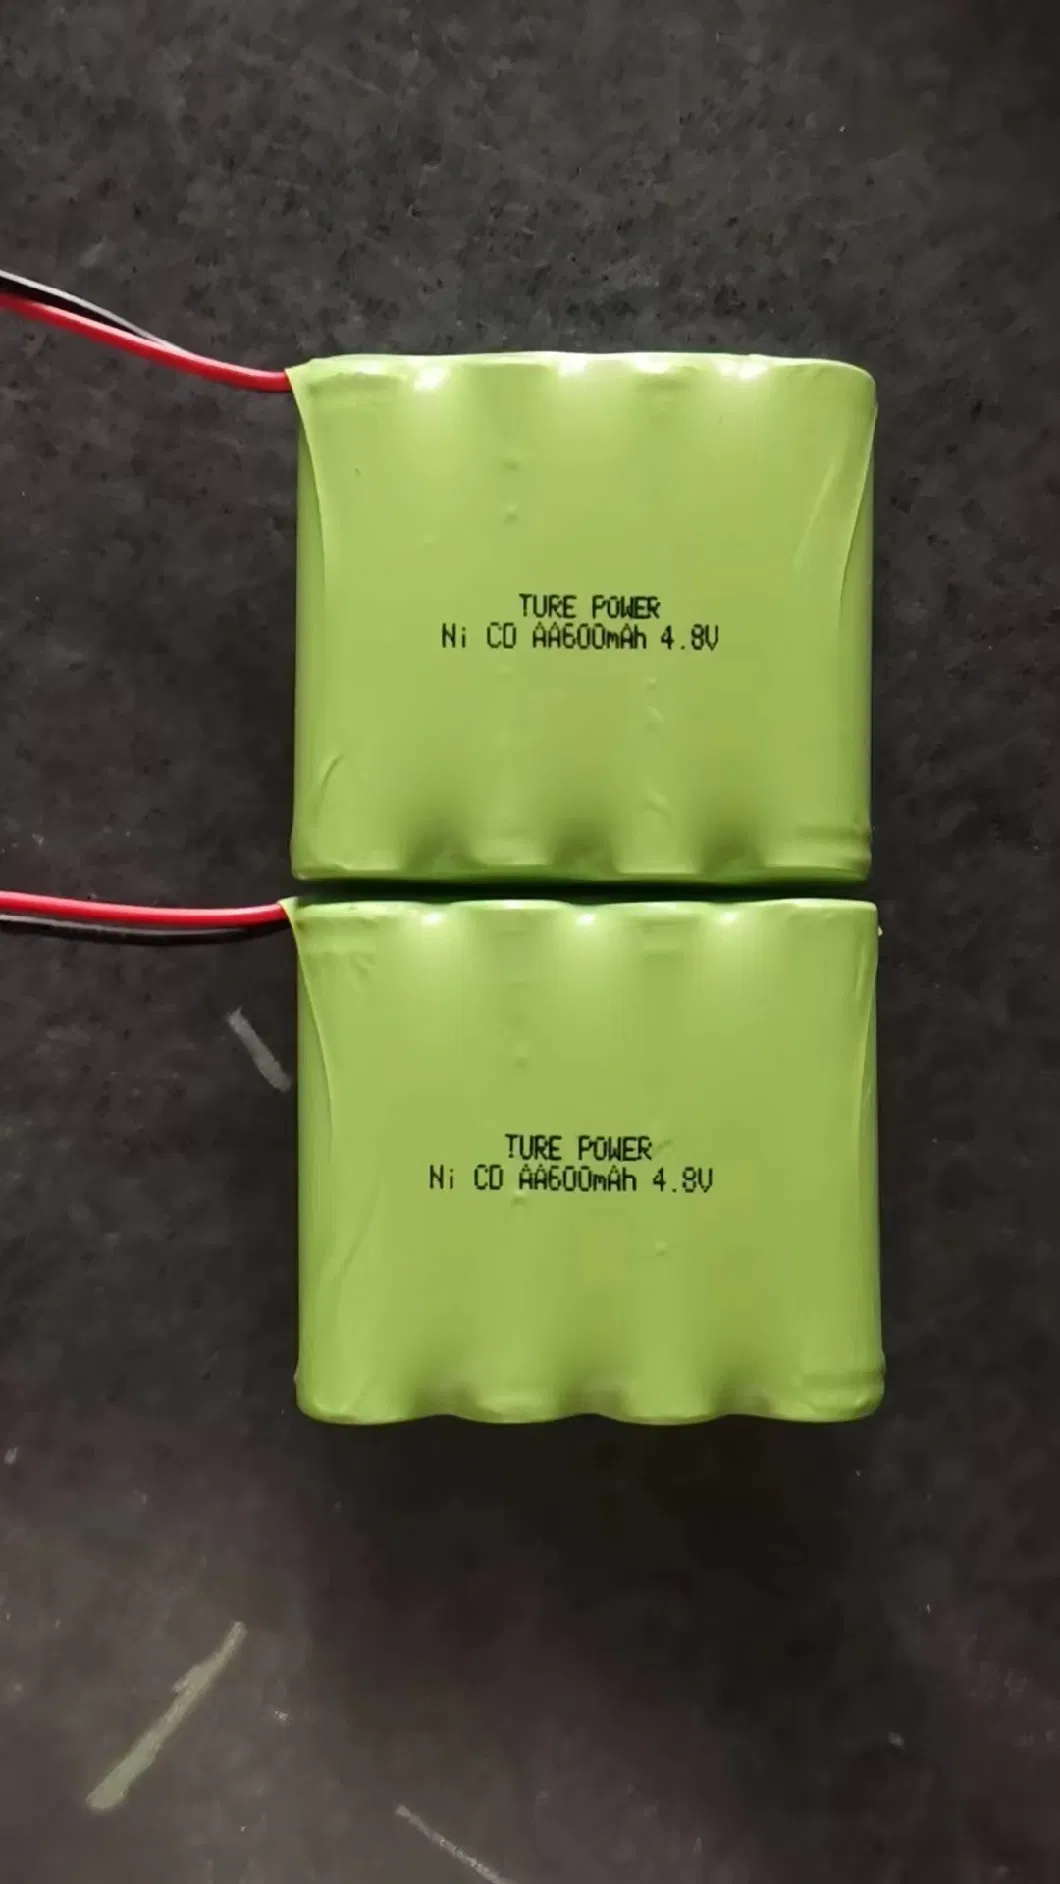 F7000mAh Rechargeable Battery for LED Lights